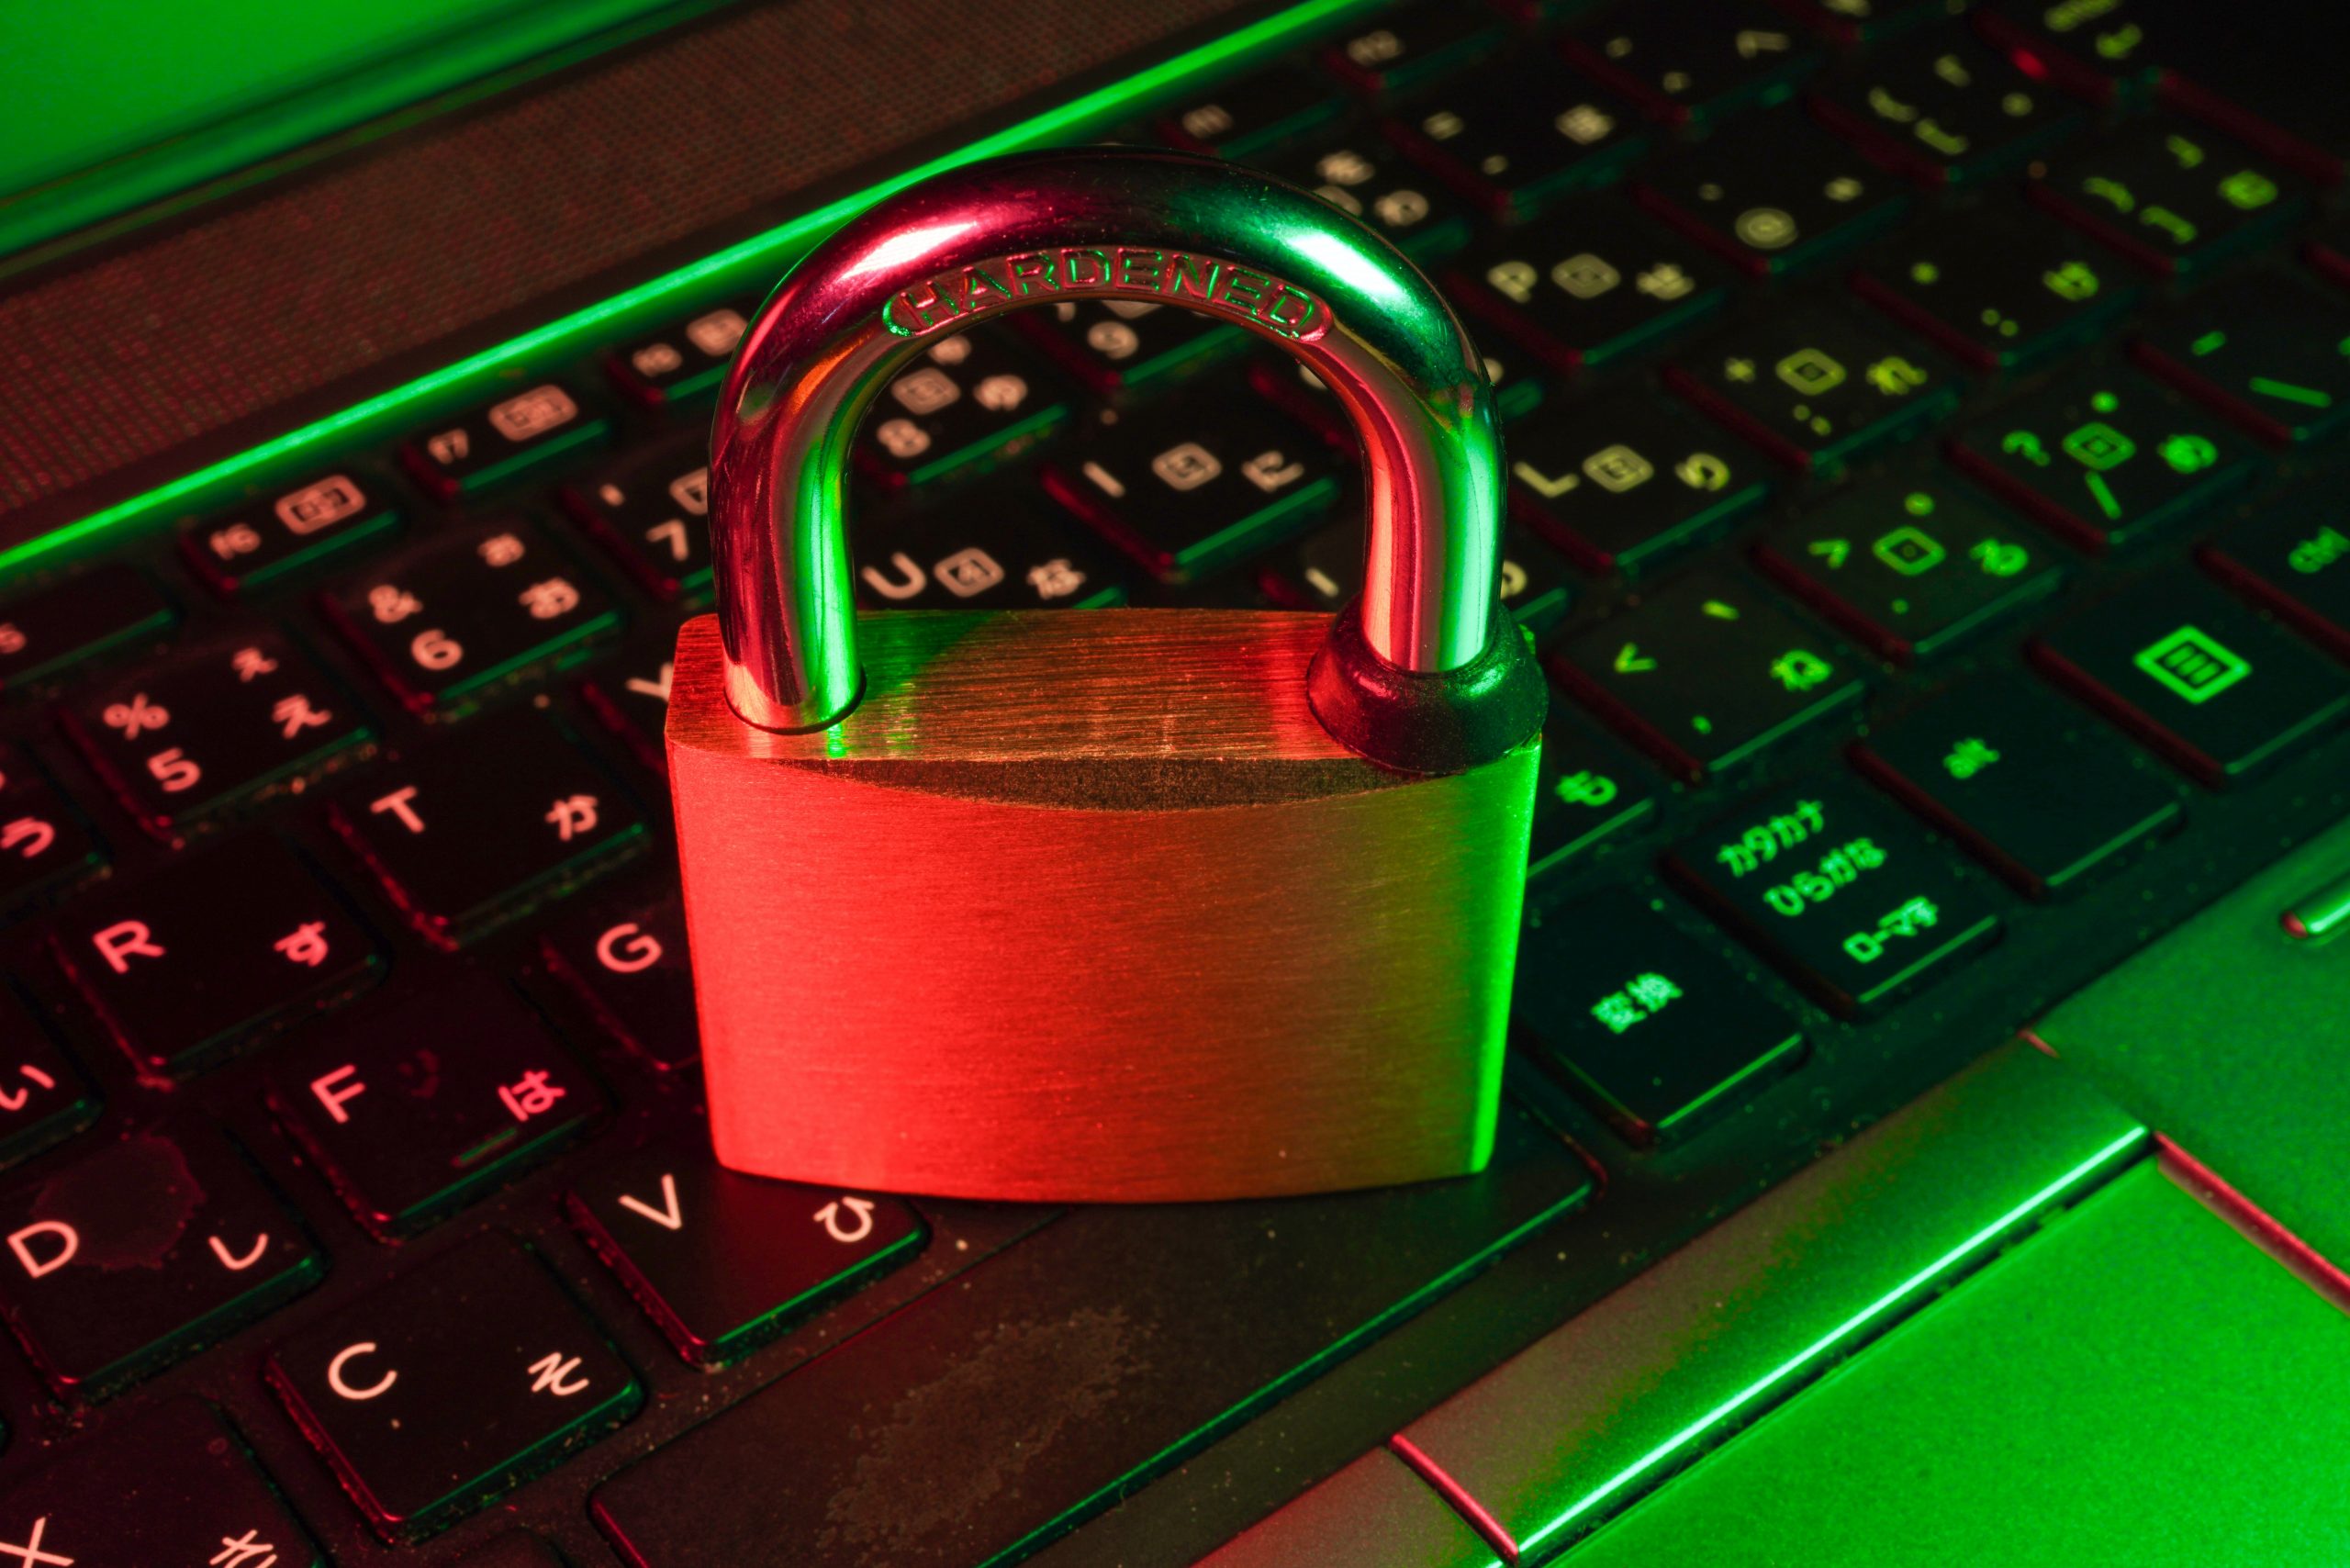 [Interview] How to keep your PC safe? Read what Cyber Experts have to say (Part 2)